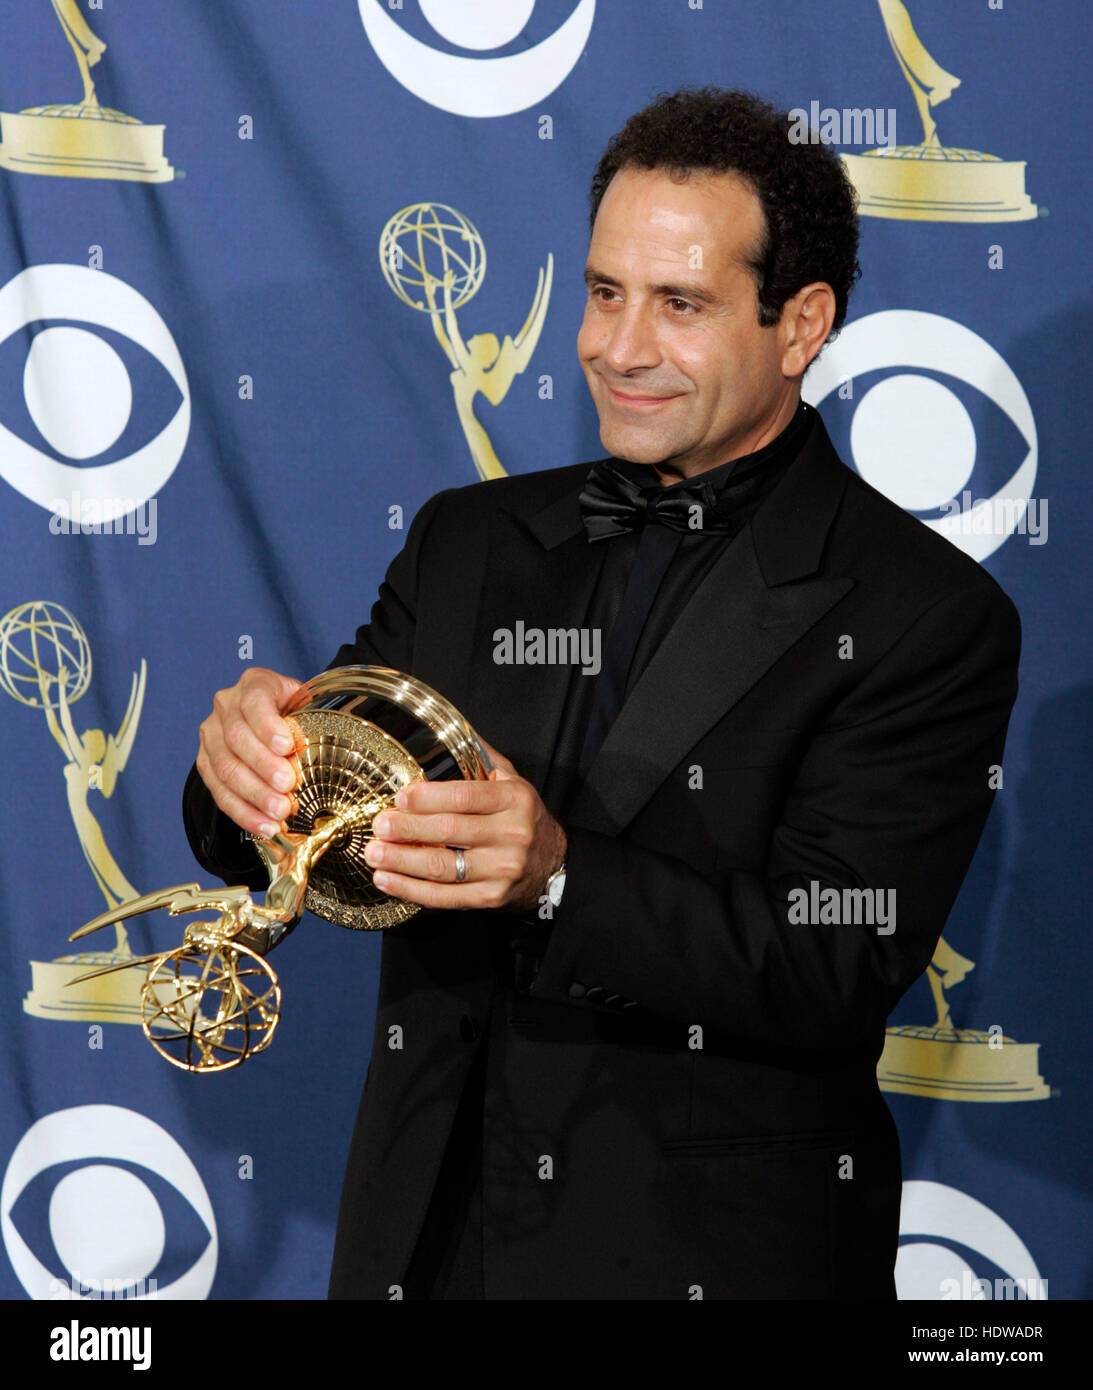 Tony Shalhoub at the 57th Annual Emmy Awards at the Shrine Auditorium in Los Angeles, September 18, 2005. Photo credit: Francis Specker Stock Photo